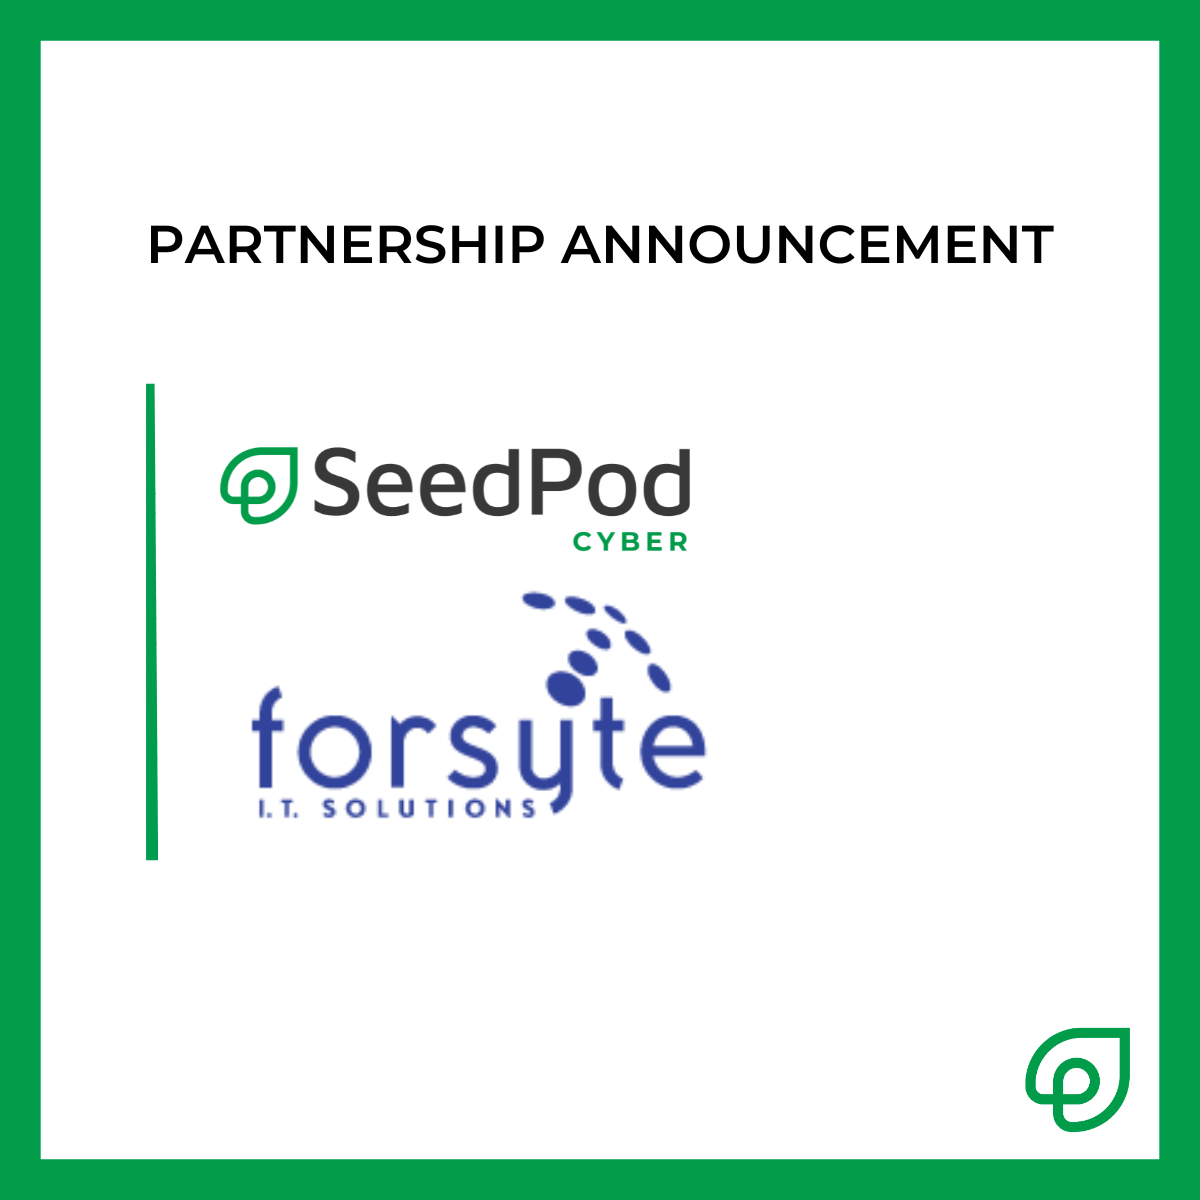 partnership announcement graphic SeedPod Cyber and Forsyte I.T. Solutions